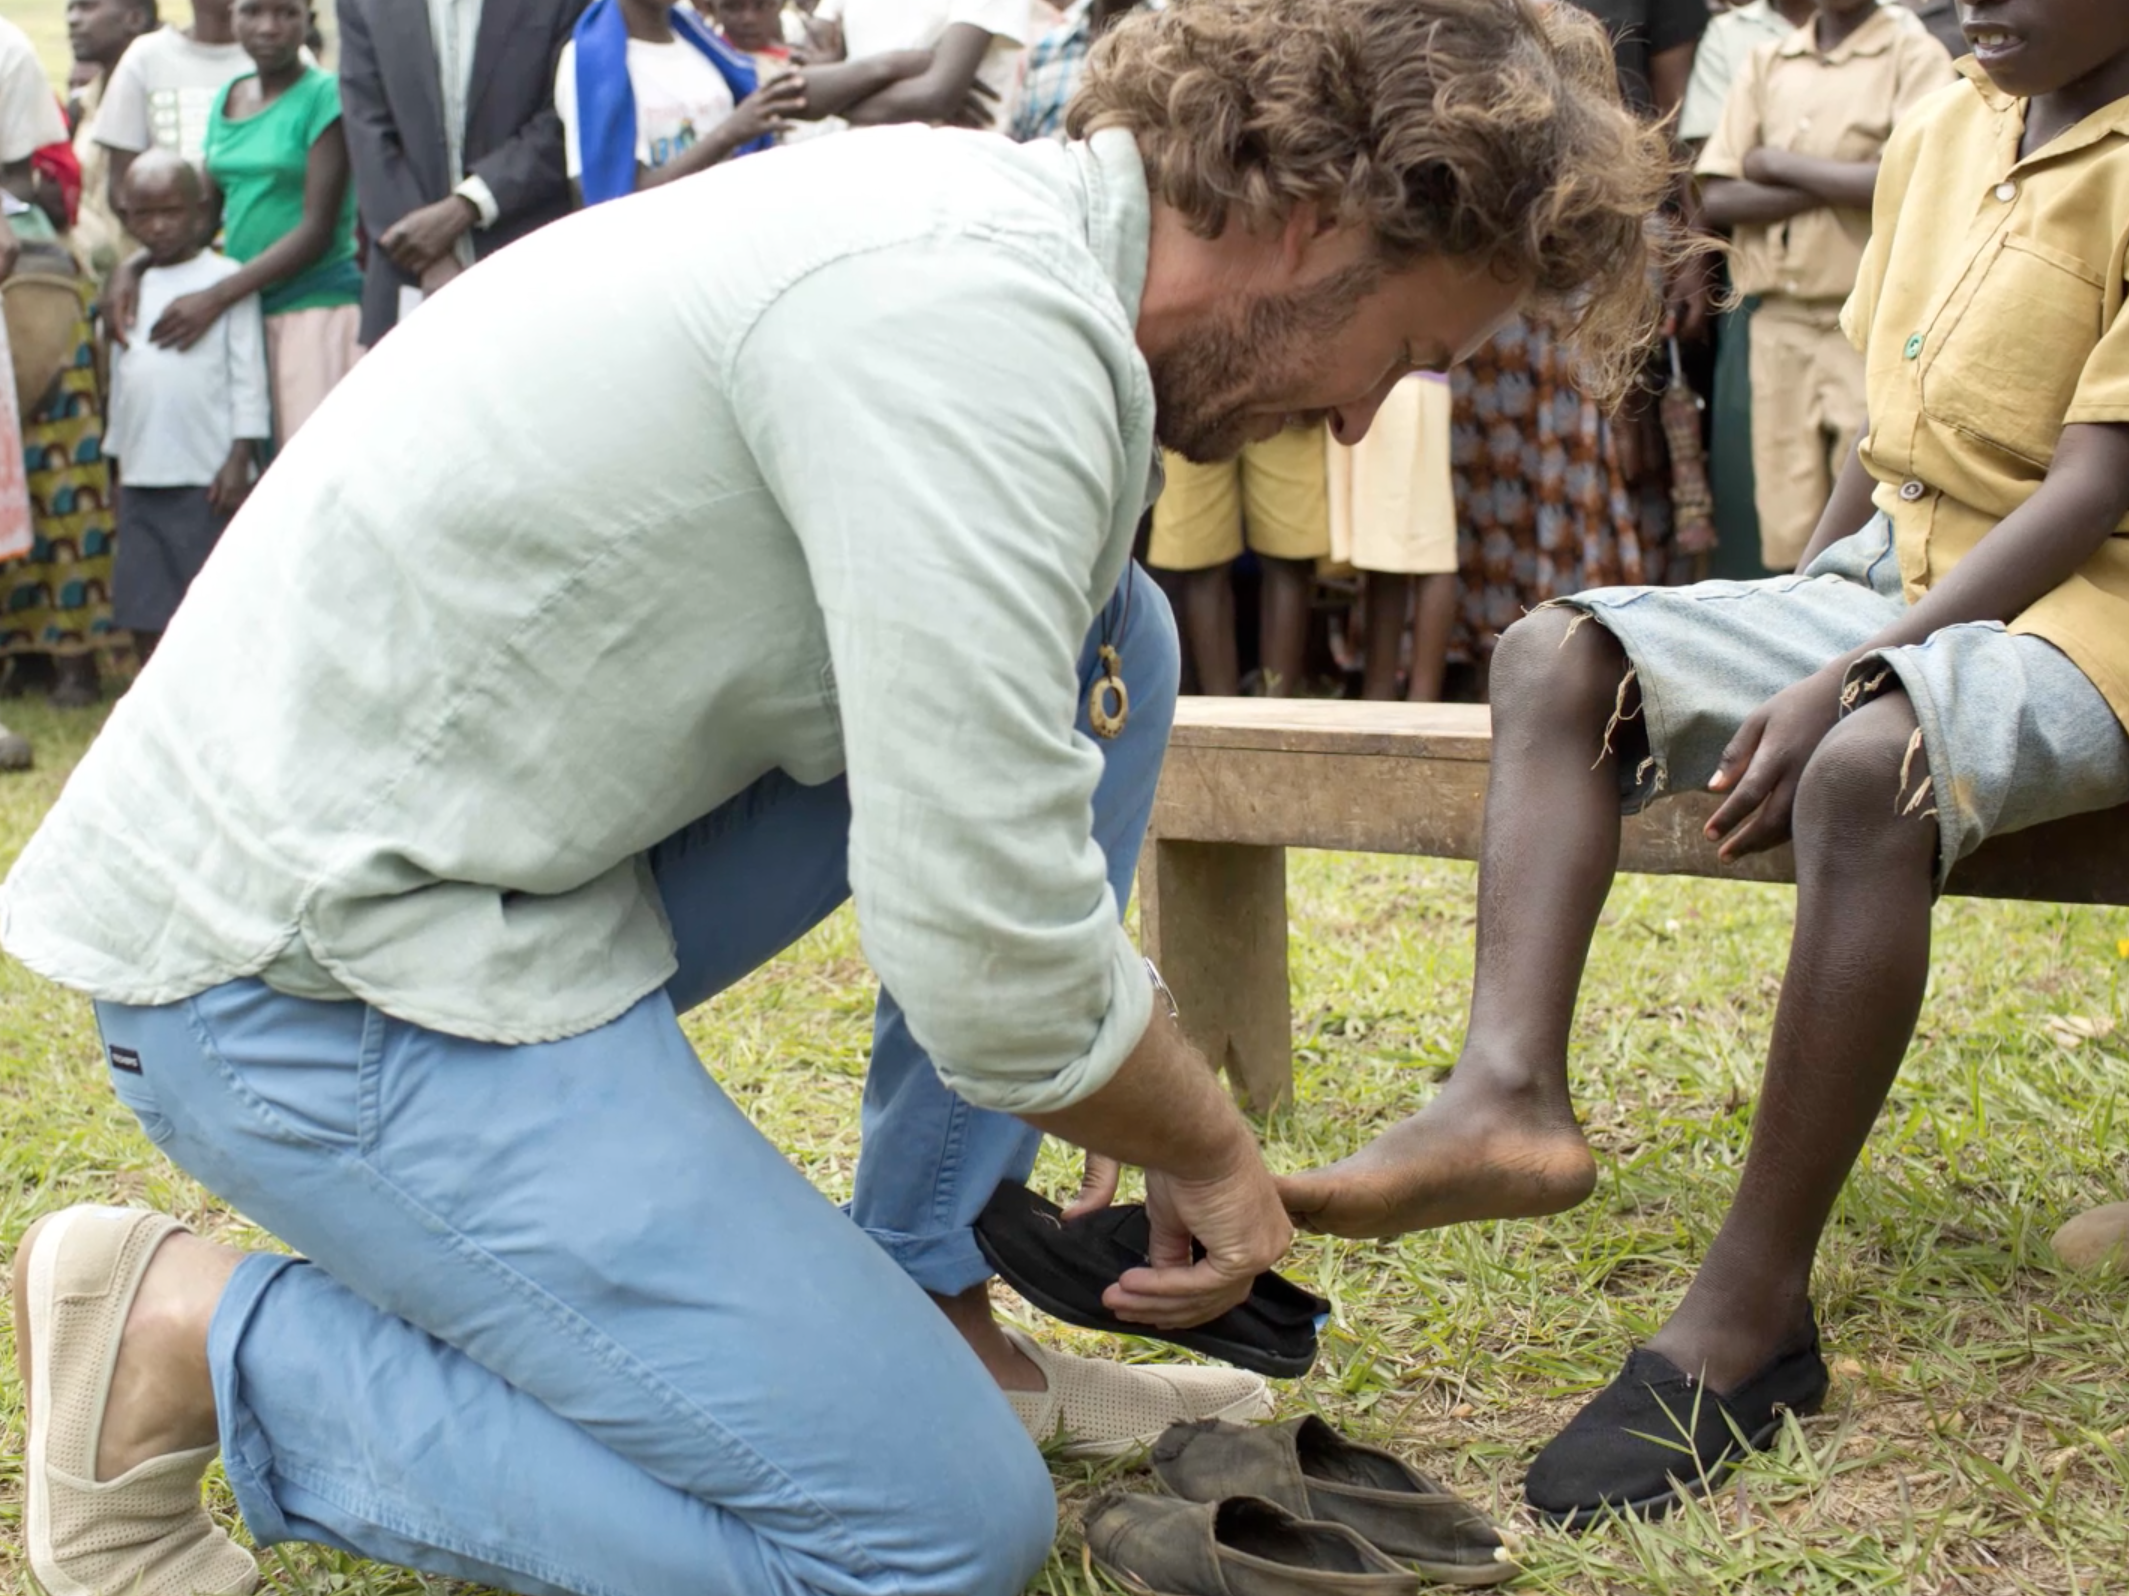 Blake Mycoskie donating shoes in Africa